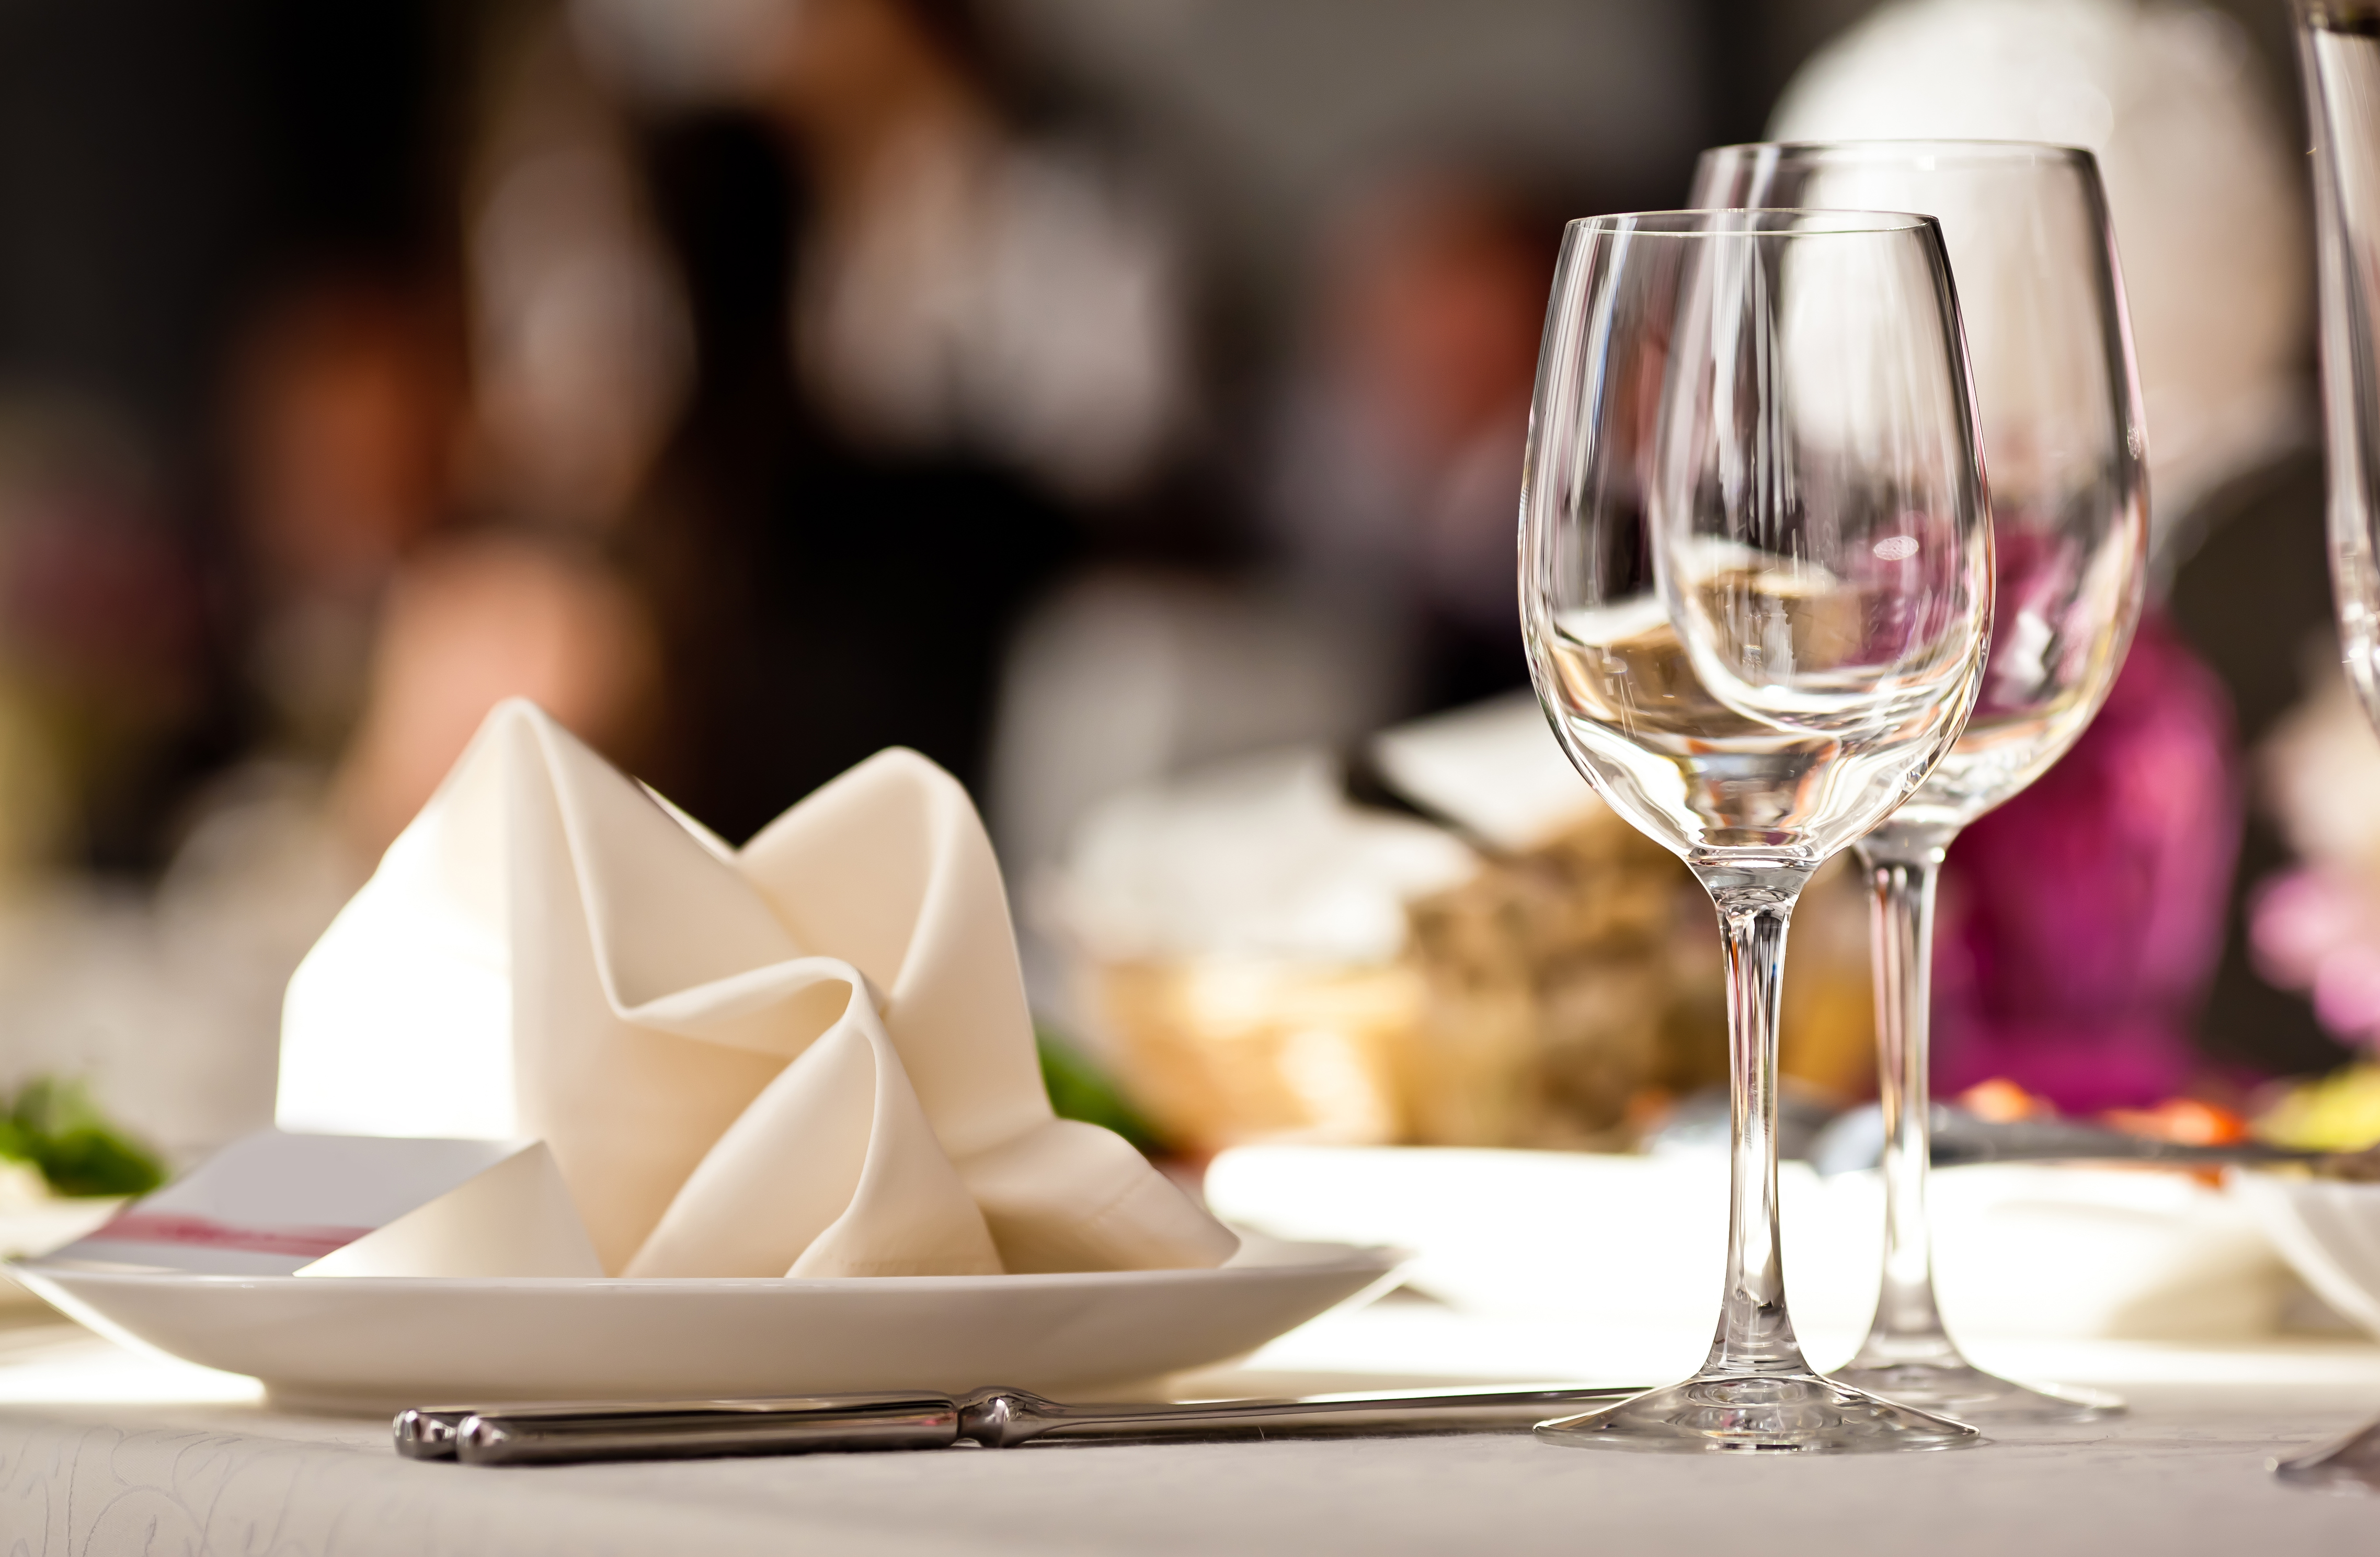 Two glasses and napkins lying on a table | Source: Shutterstock